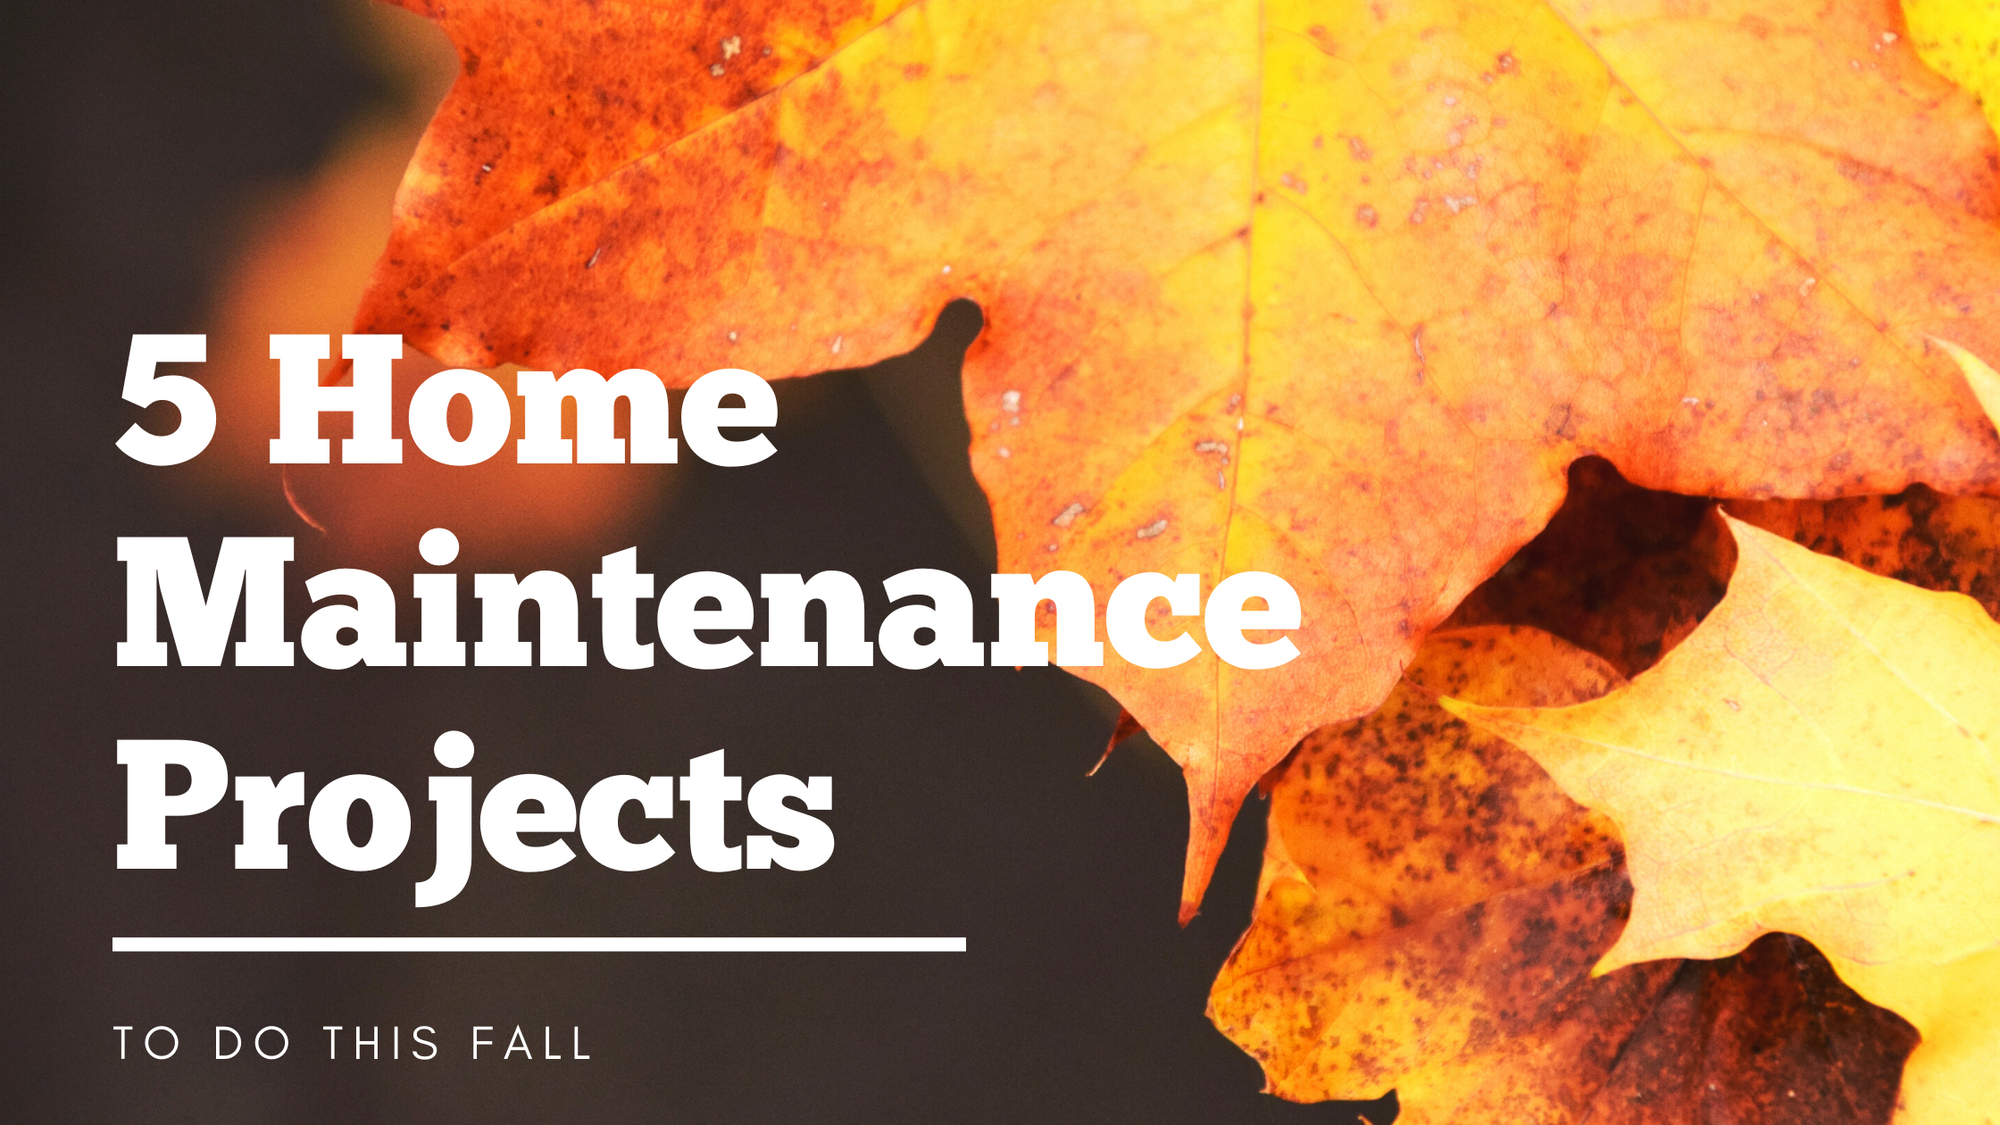 5 Home Maintenance Projects to Do This Fall